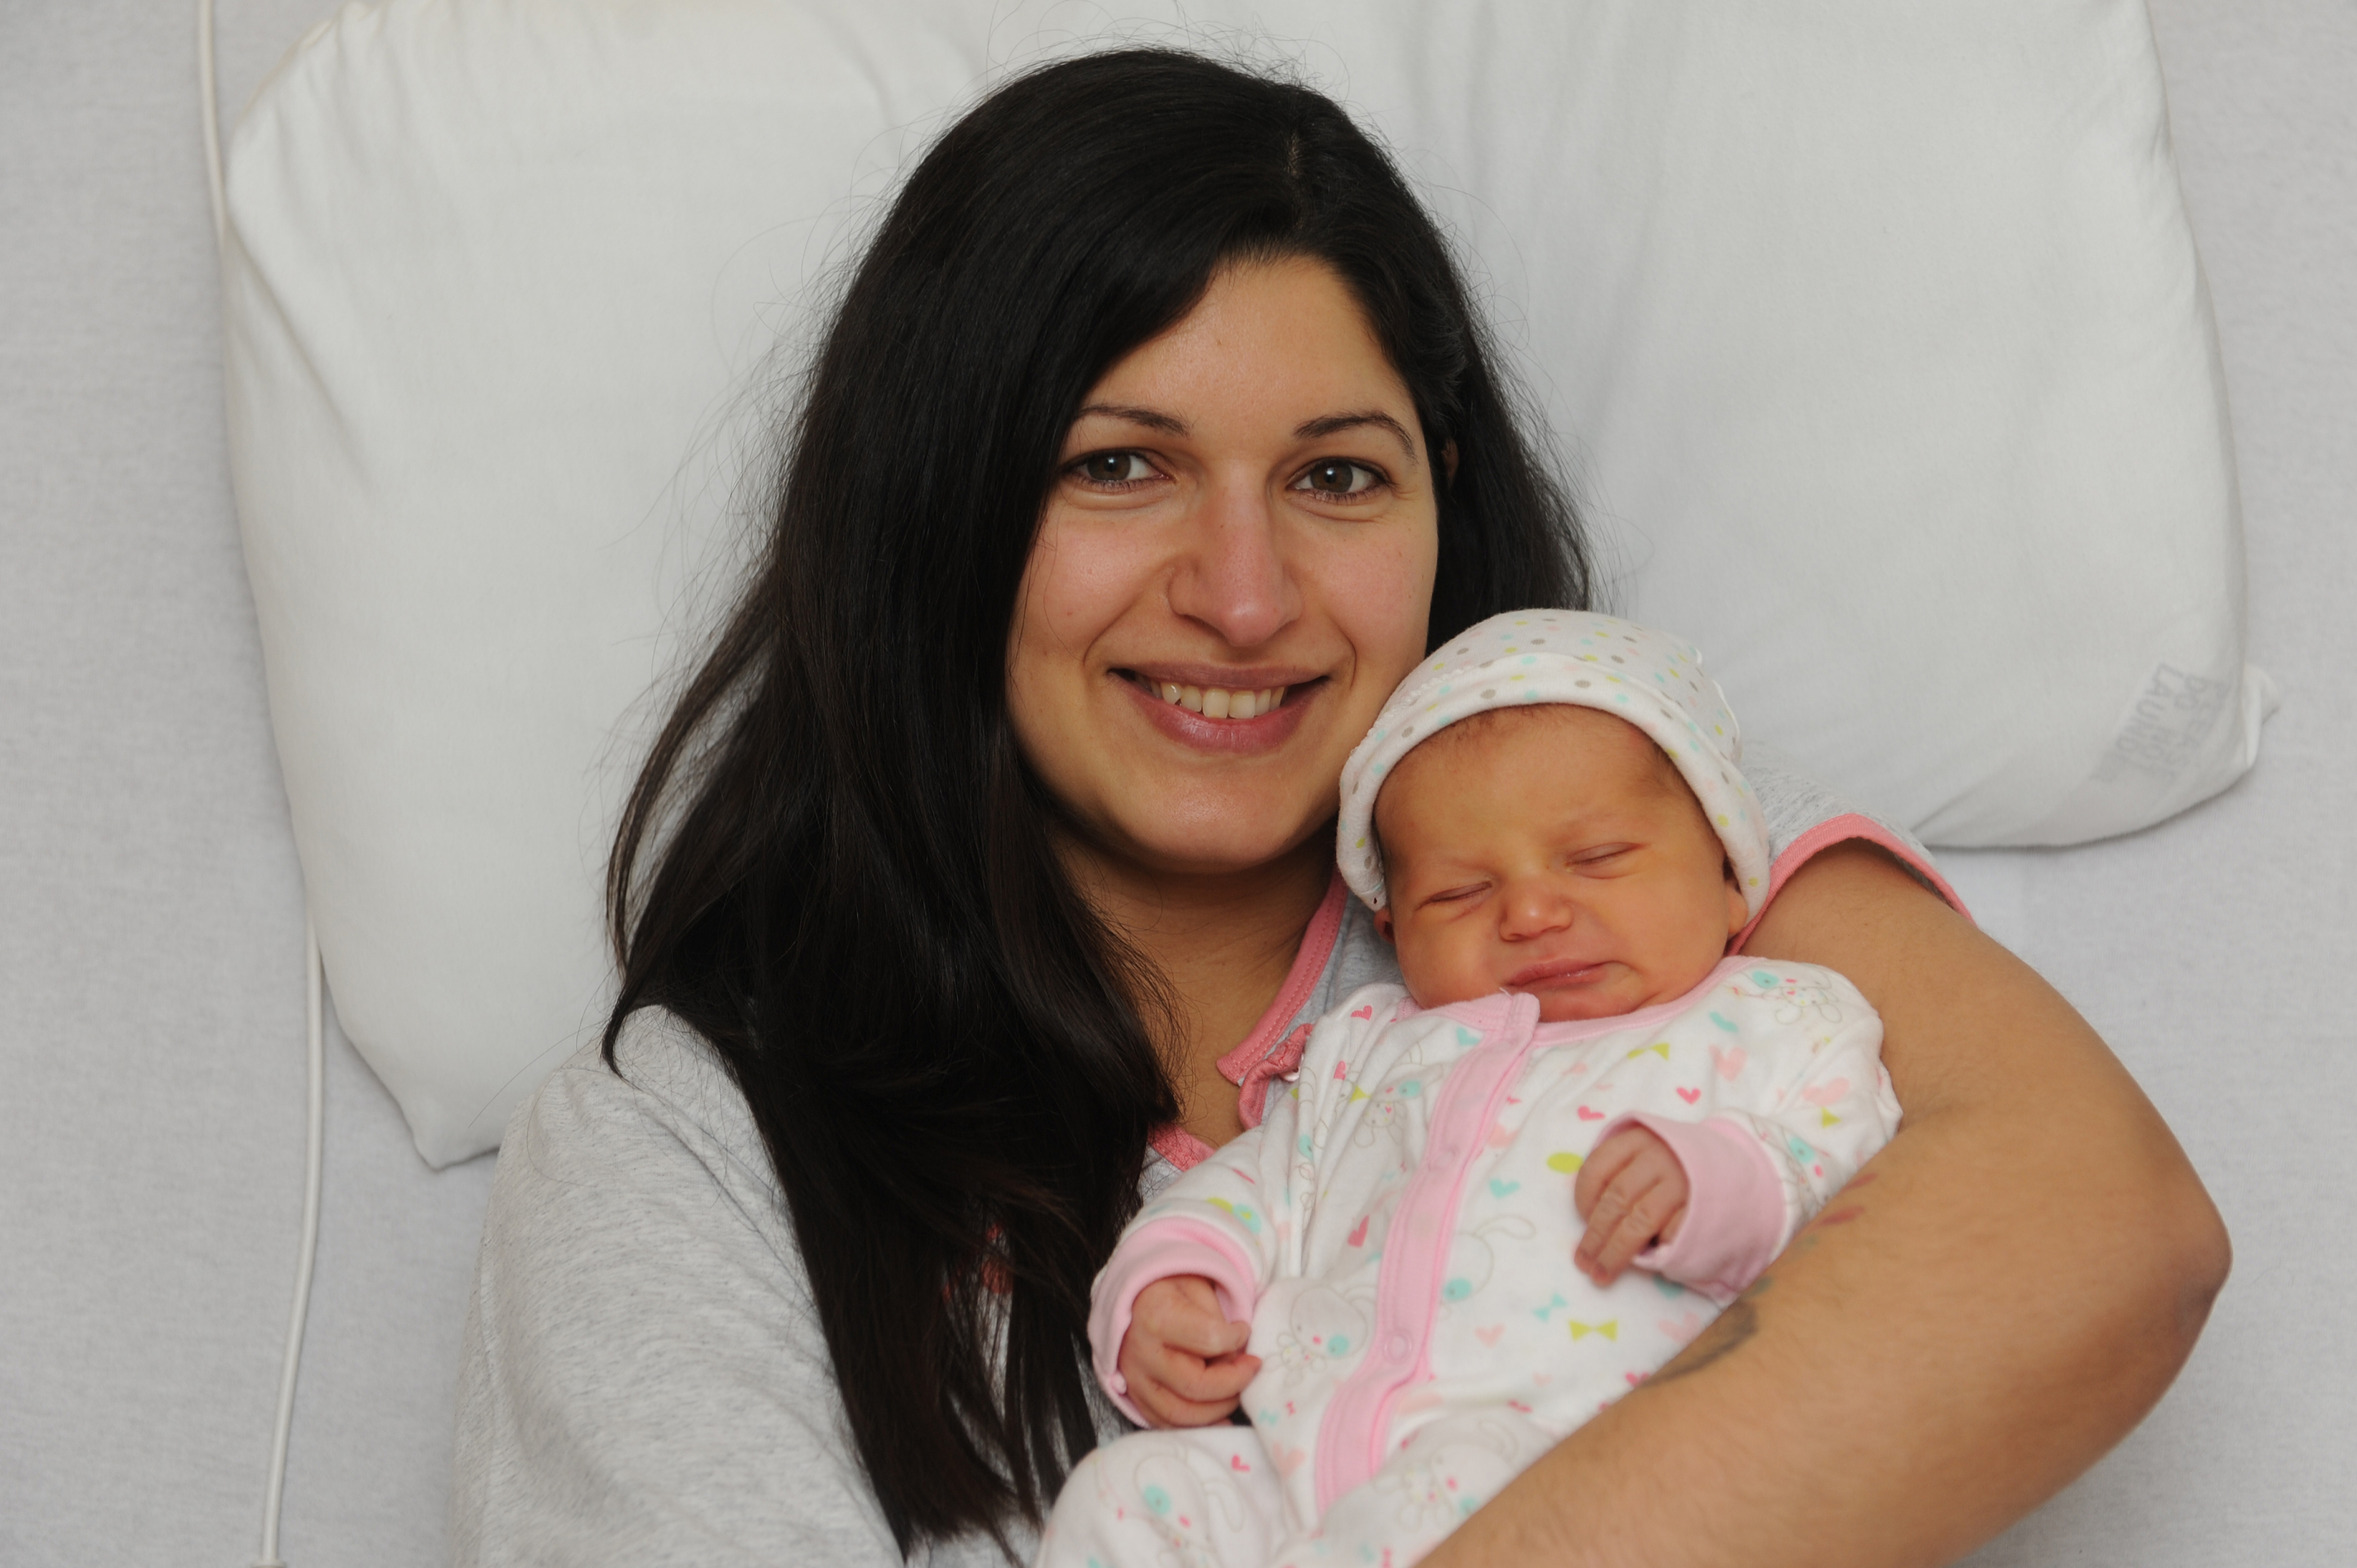 Angela and Cirilla Deak, (absent from photocall was dad Daniel). Cirilla was born at 5.38am, weighing 3.62kg and is their first child, Ninewells Hospital, Dundee